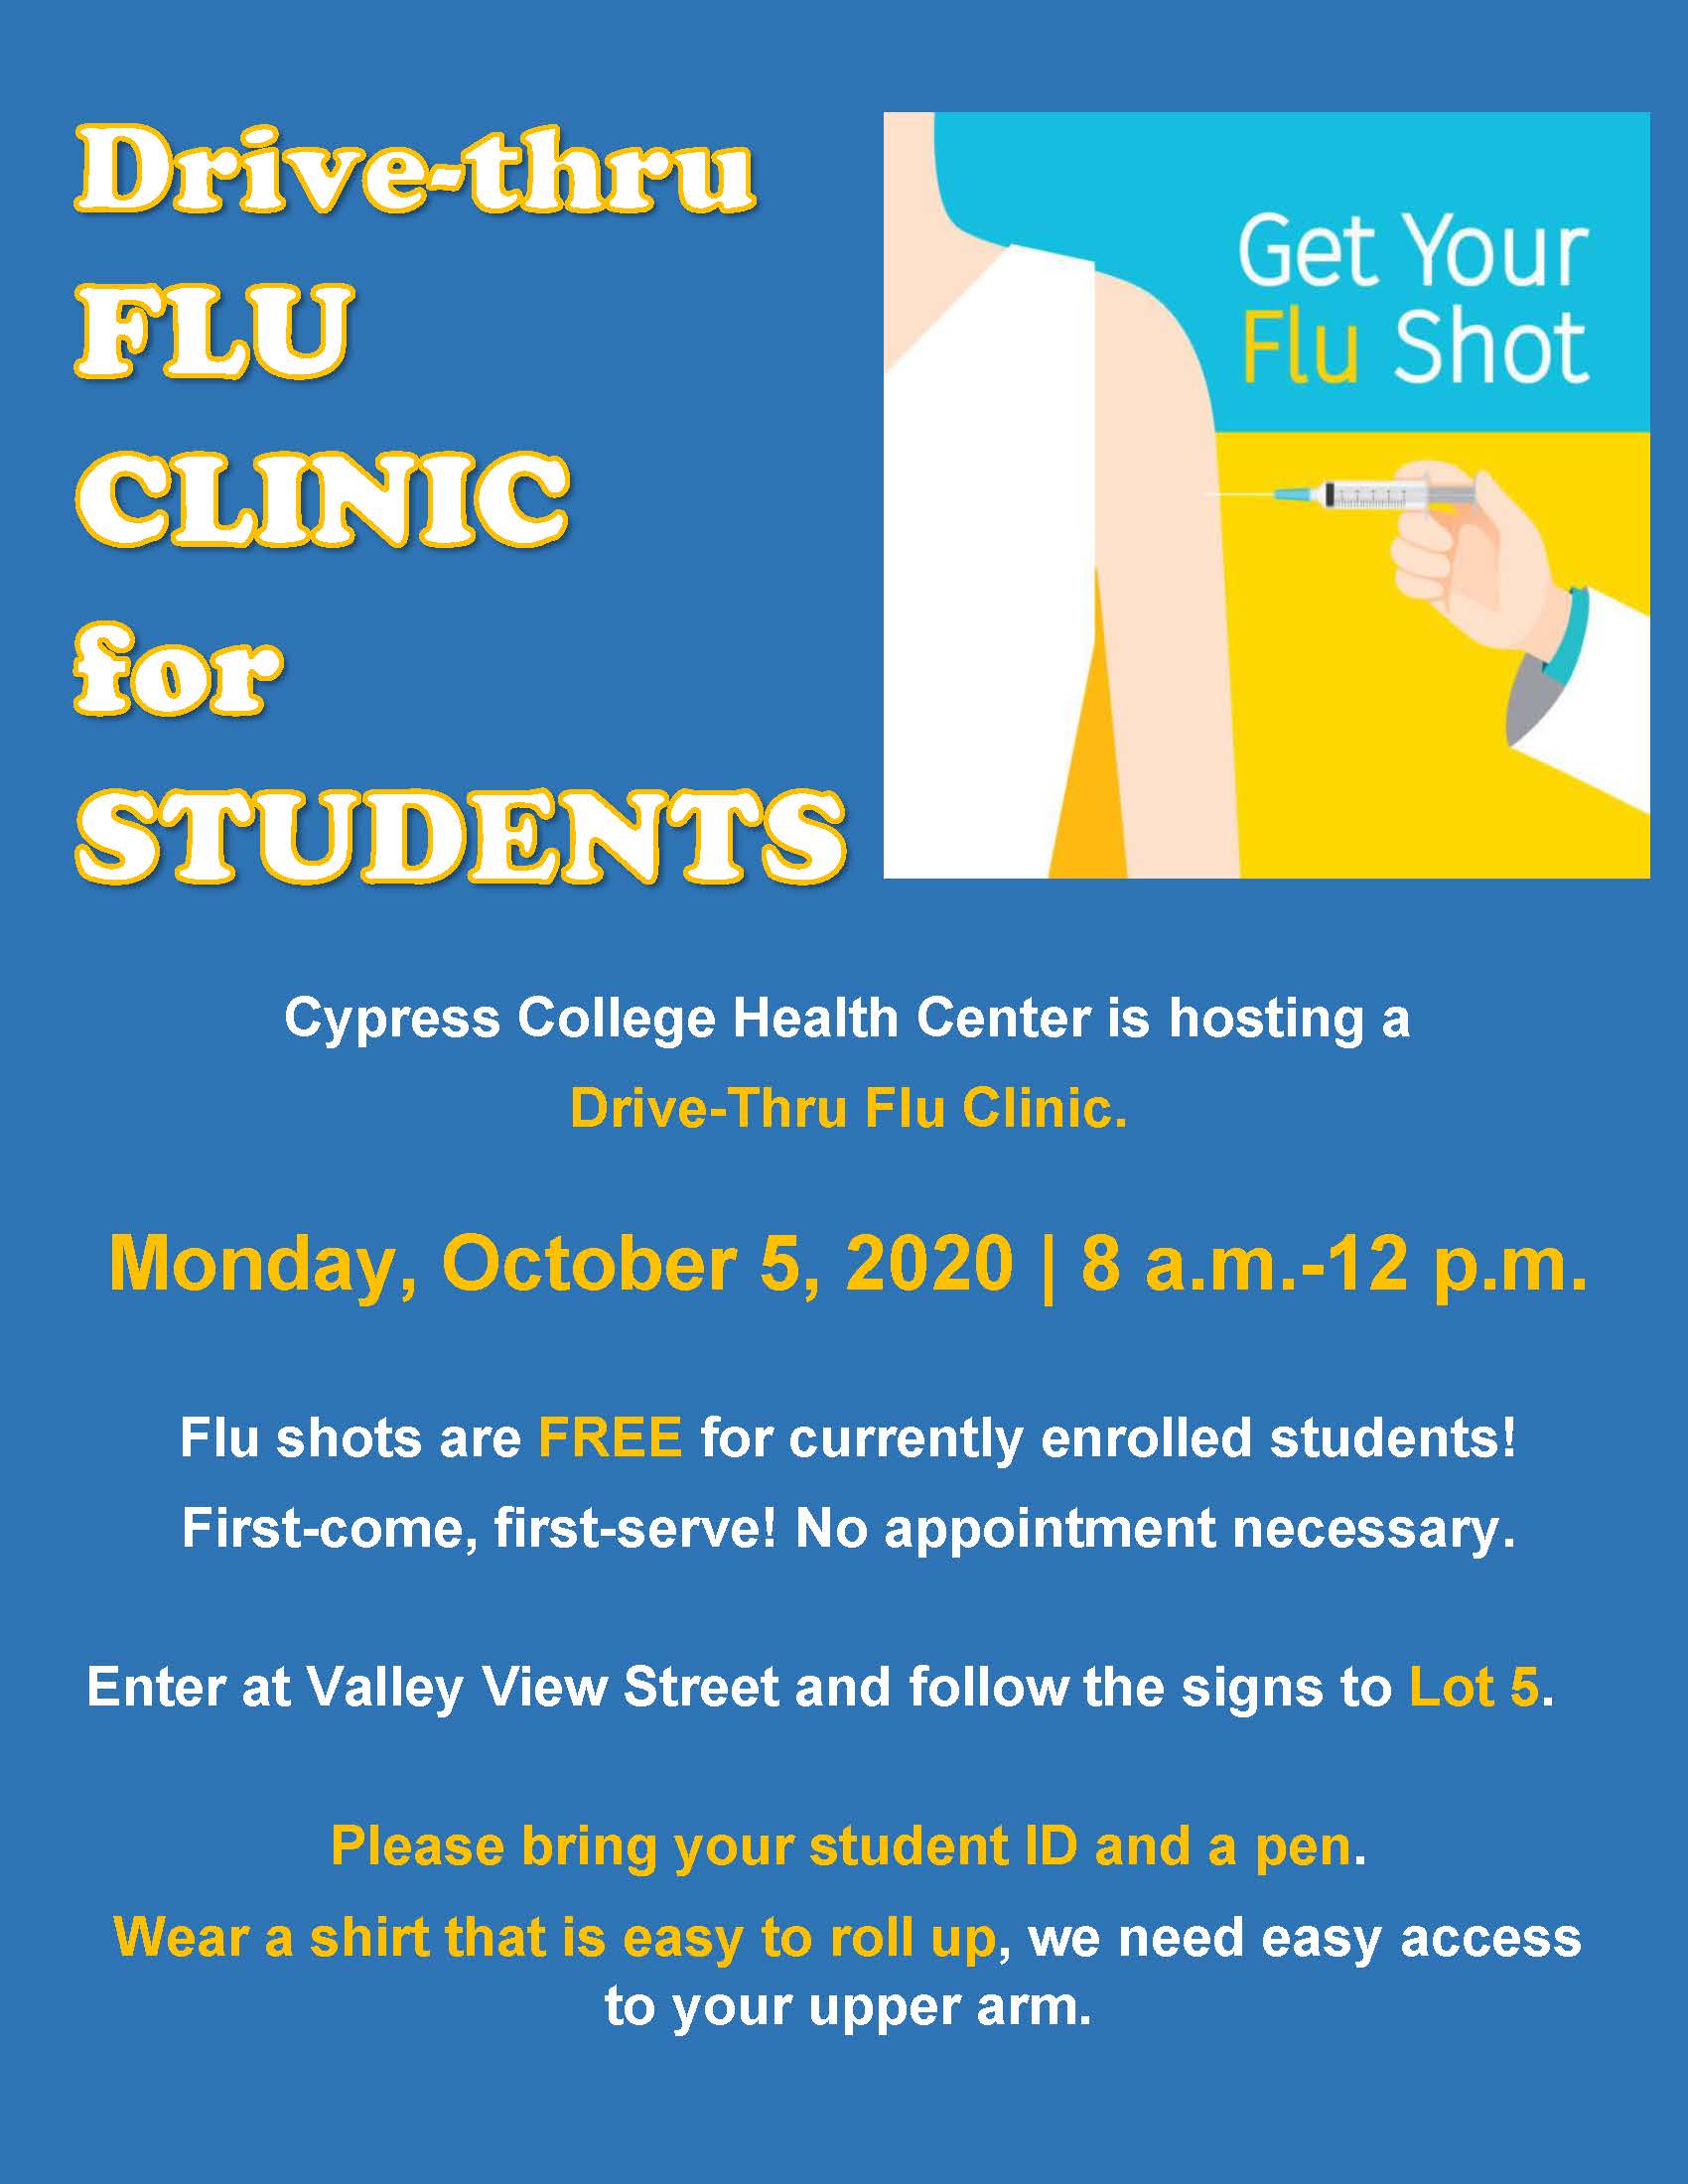 Flyer for Flu Clinic, includes image of person getting a flu shot